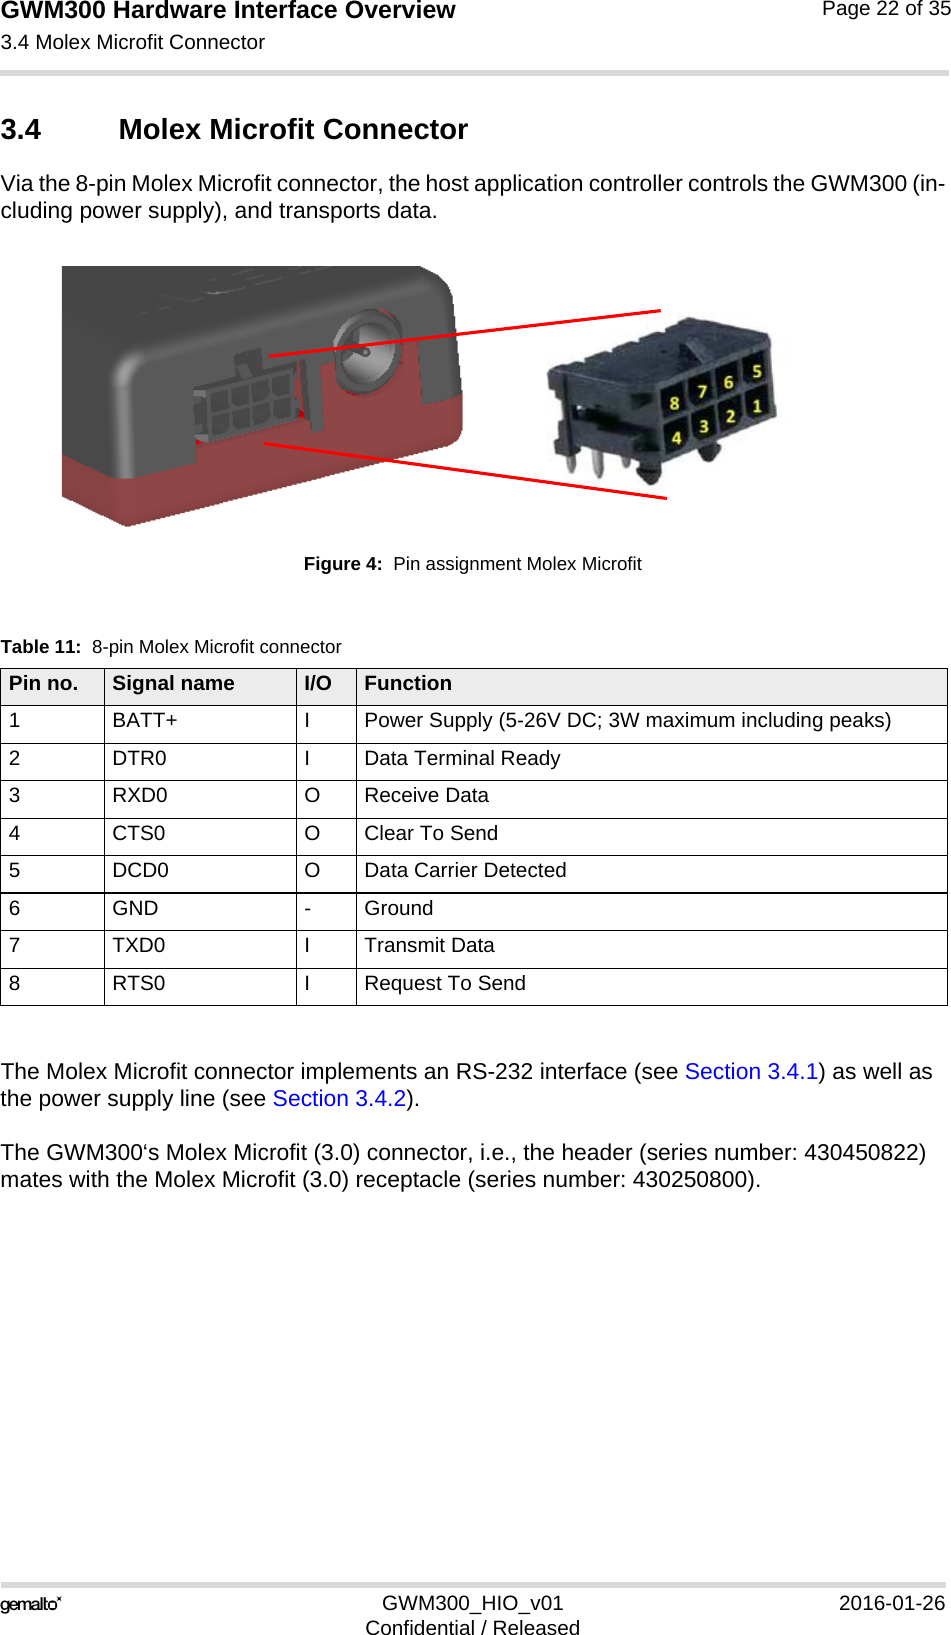 GWM300 Hardware Interface Overview3.4 Molex Microfit Connector26GWM300_HIO_v01 2016-01-26Confidential / ReleasedPage 22 of 353.4 Molex Microfit ConnectorVia the 8-pin Molex Microfit connector, the host application controller controls the GWM300 (in-cluding power supply), and transports data.Figure 4:  Pin assignment Molex MicrofitThe Molex Microfit connector implements an RS-232 interface (see Section 3.4.1) as well as the power supply line (see Section 3.4.2).The GWM300‘s Molex Microfit (3.0) connector, i.e., the header (series number: 430450822) mates with the Molex Microfit (3.0) receptacle (series number: 430250800).Table 11:  8-pin Molex Microfit connectorPin no. Signal name I/O Function1 BATT+ I Power Supply (5-26V DC; 3W maximum including peaks)2 DTR0 I Data Terminal Ready 3 RXD0 O Receive Data4 CTS0 O Clear To Send5 DCD0 O Data Carrier Detected6 GND - Ground7 TXD0 I Transmit Data8 RTS0 I Request To Send 